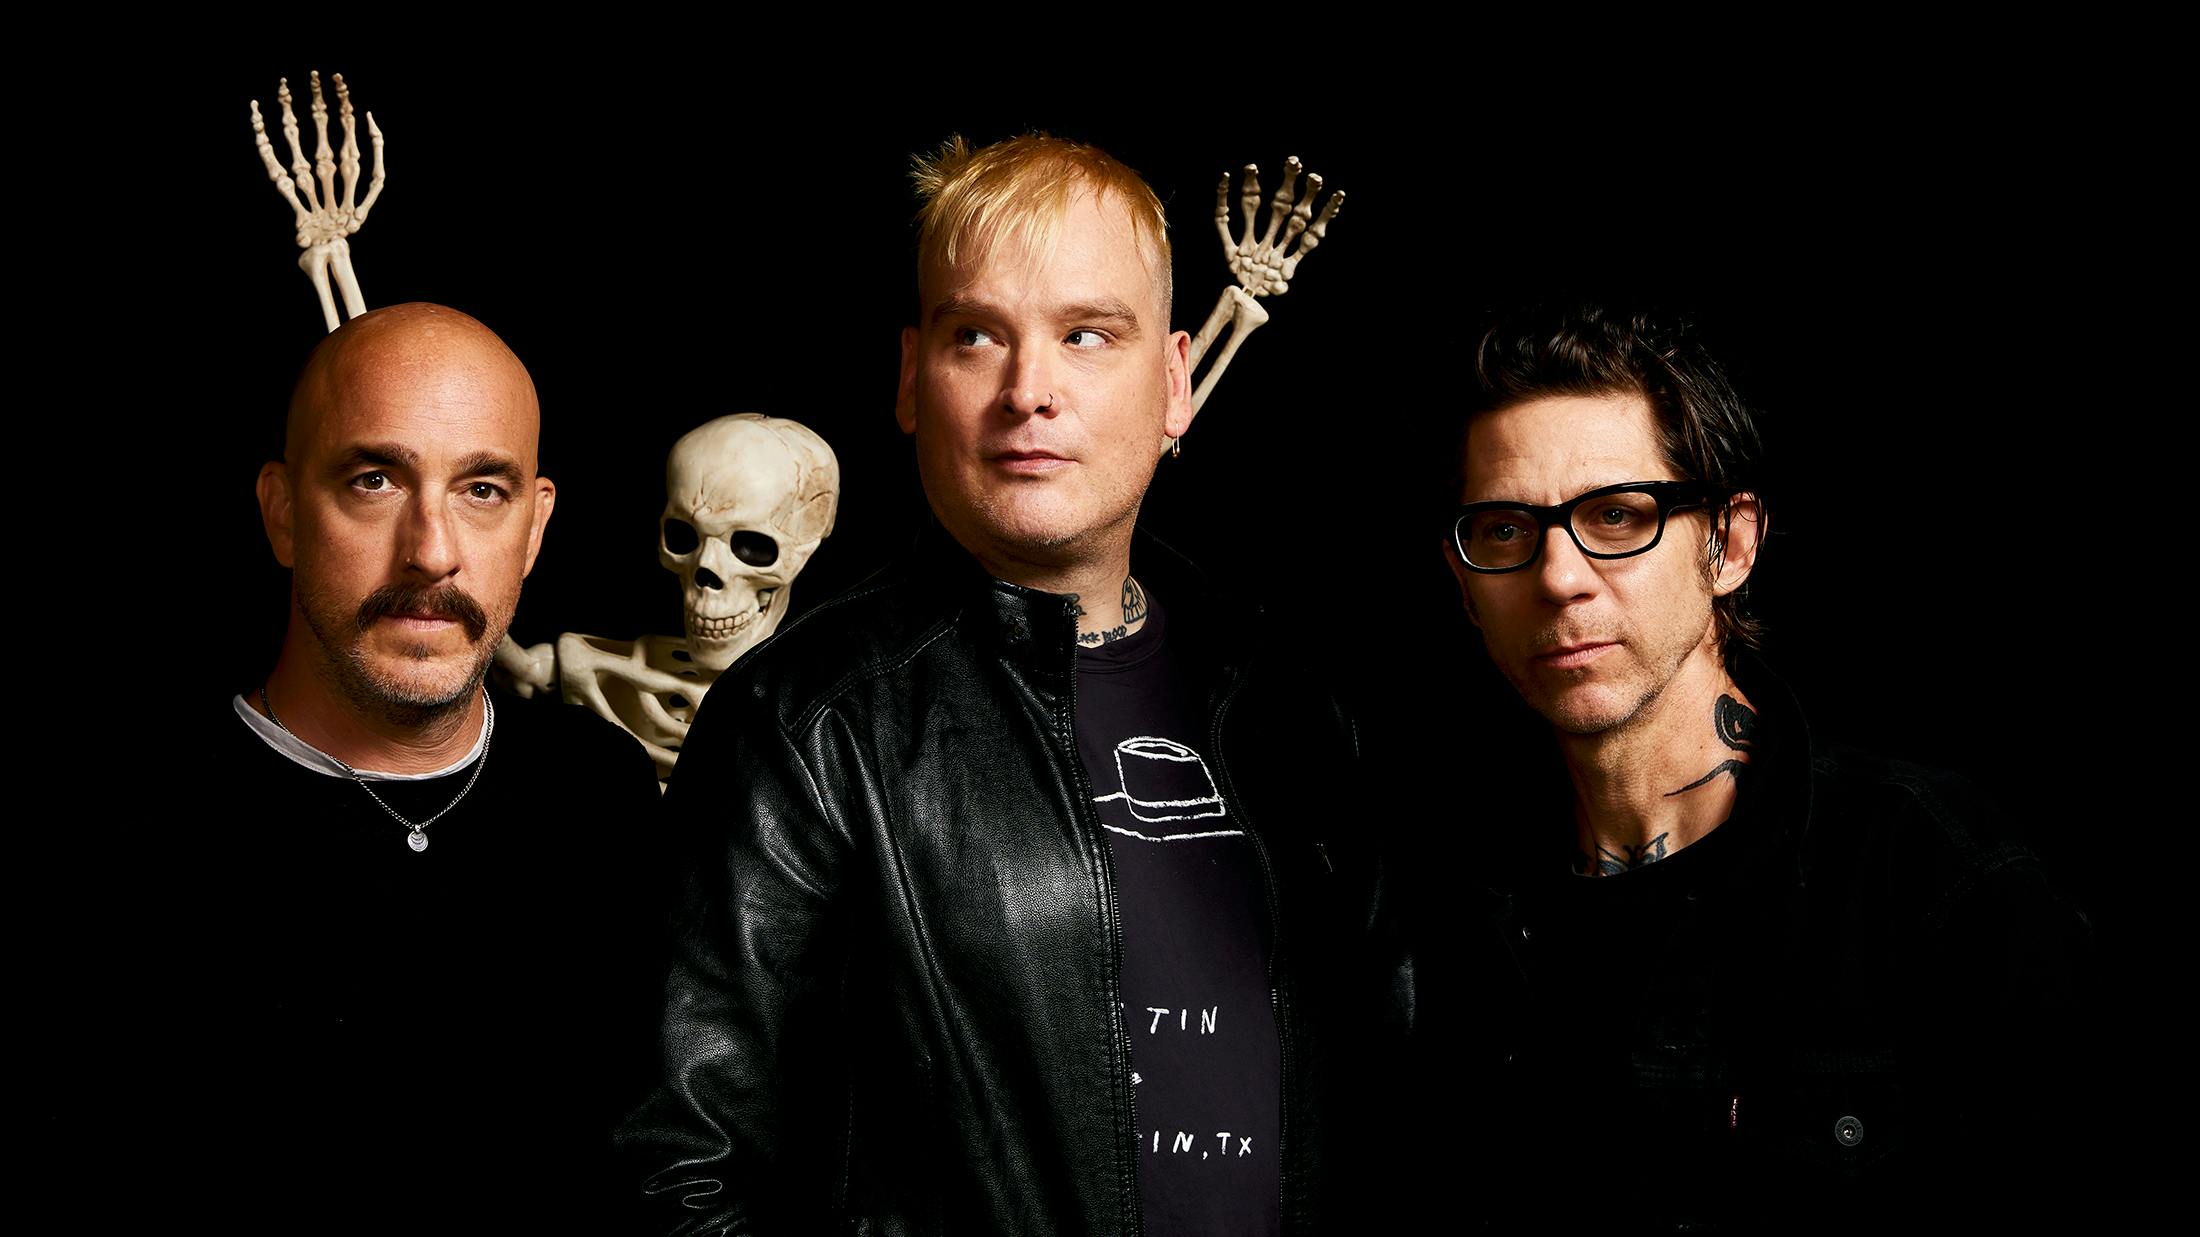 Alkaline Trio: “It’s like we’re living in the apocalypse… it’s end-of-days stuff out there”